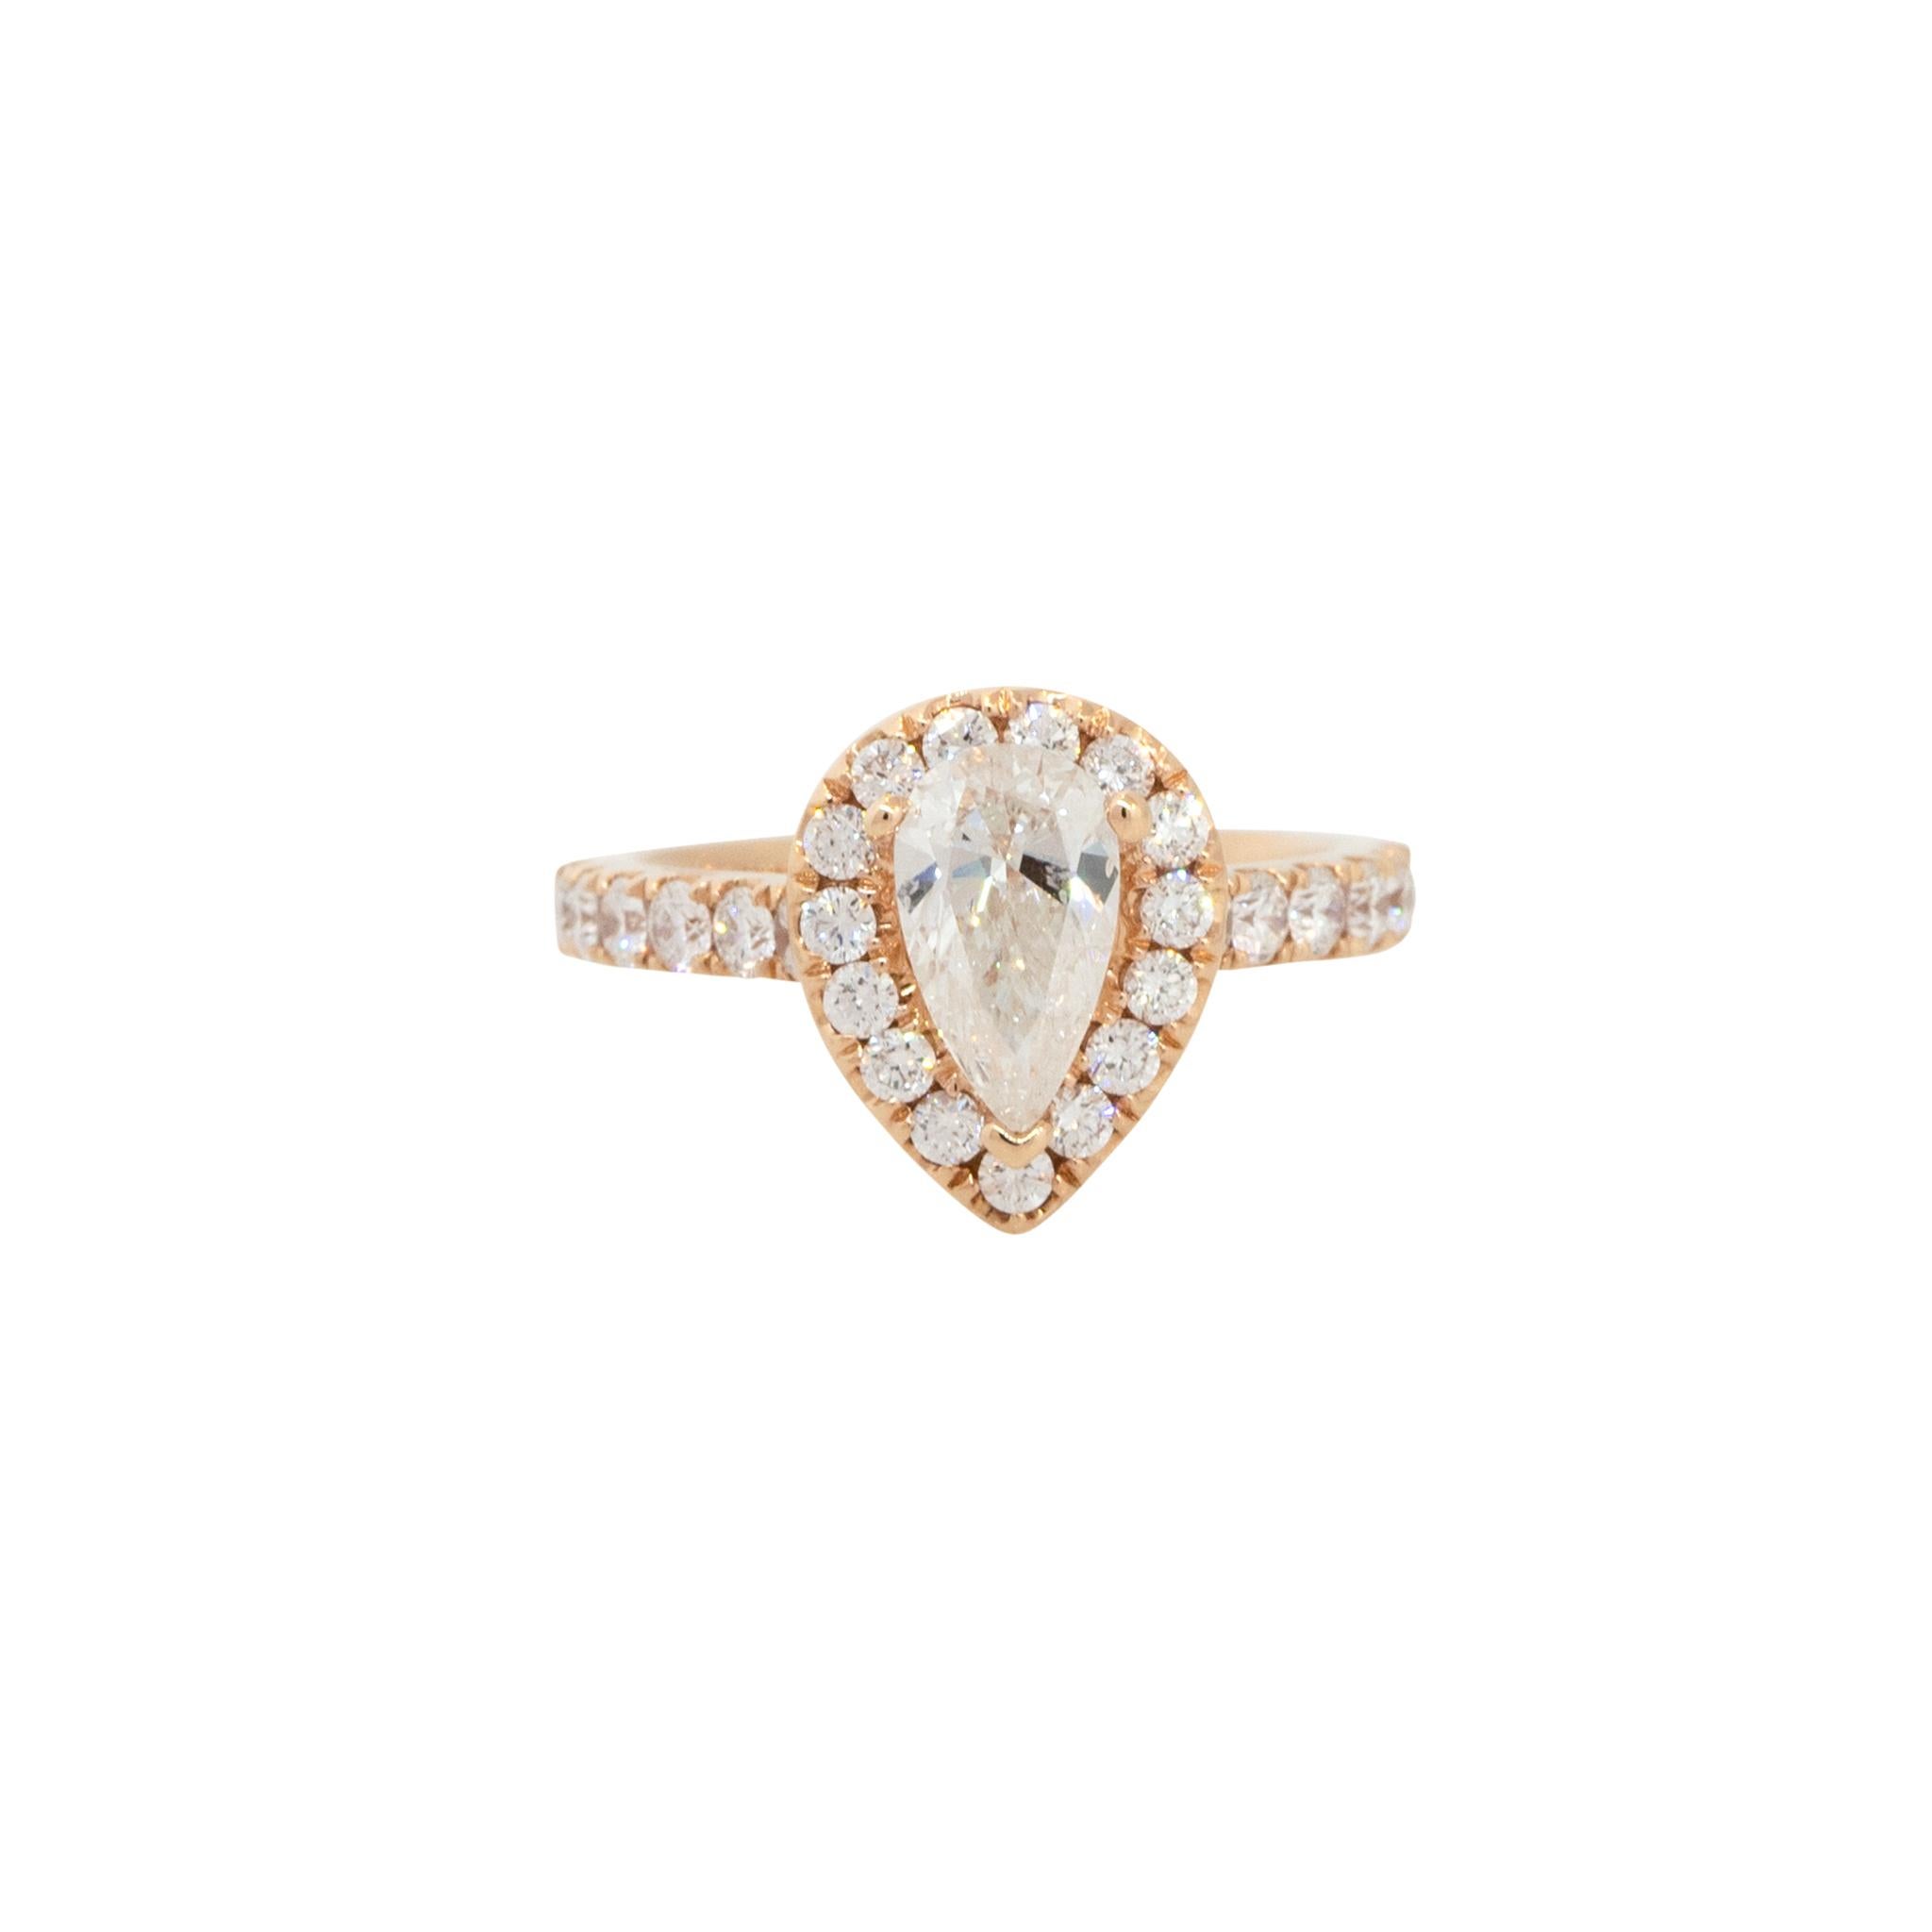 GIA Certified 18k Rose Gold 1.94ctw Pear Shaped Diamond Engagement Ring

Raymond Lee Jewelers in Boca Raton -- South Florida’s destination for diamonds, fine jewelry, antique jewelry, estate pieces, and vintage jewels.

Style: Women's 3 Prong Halo